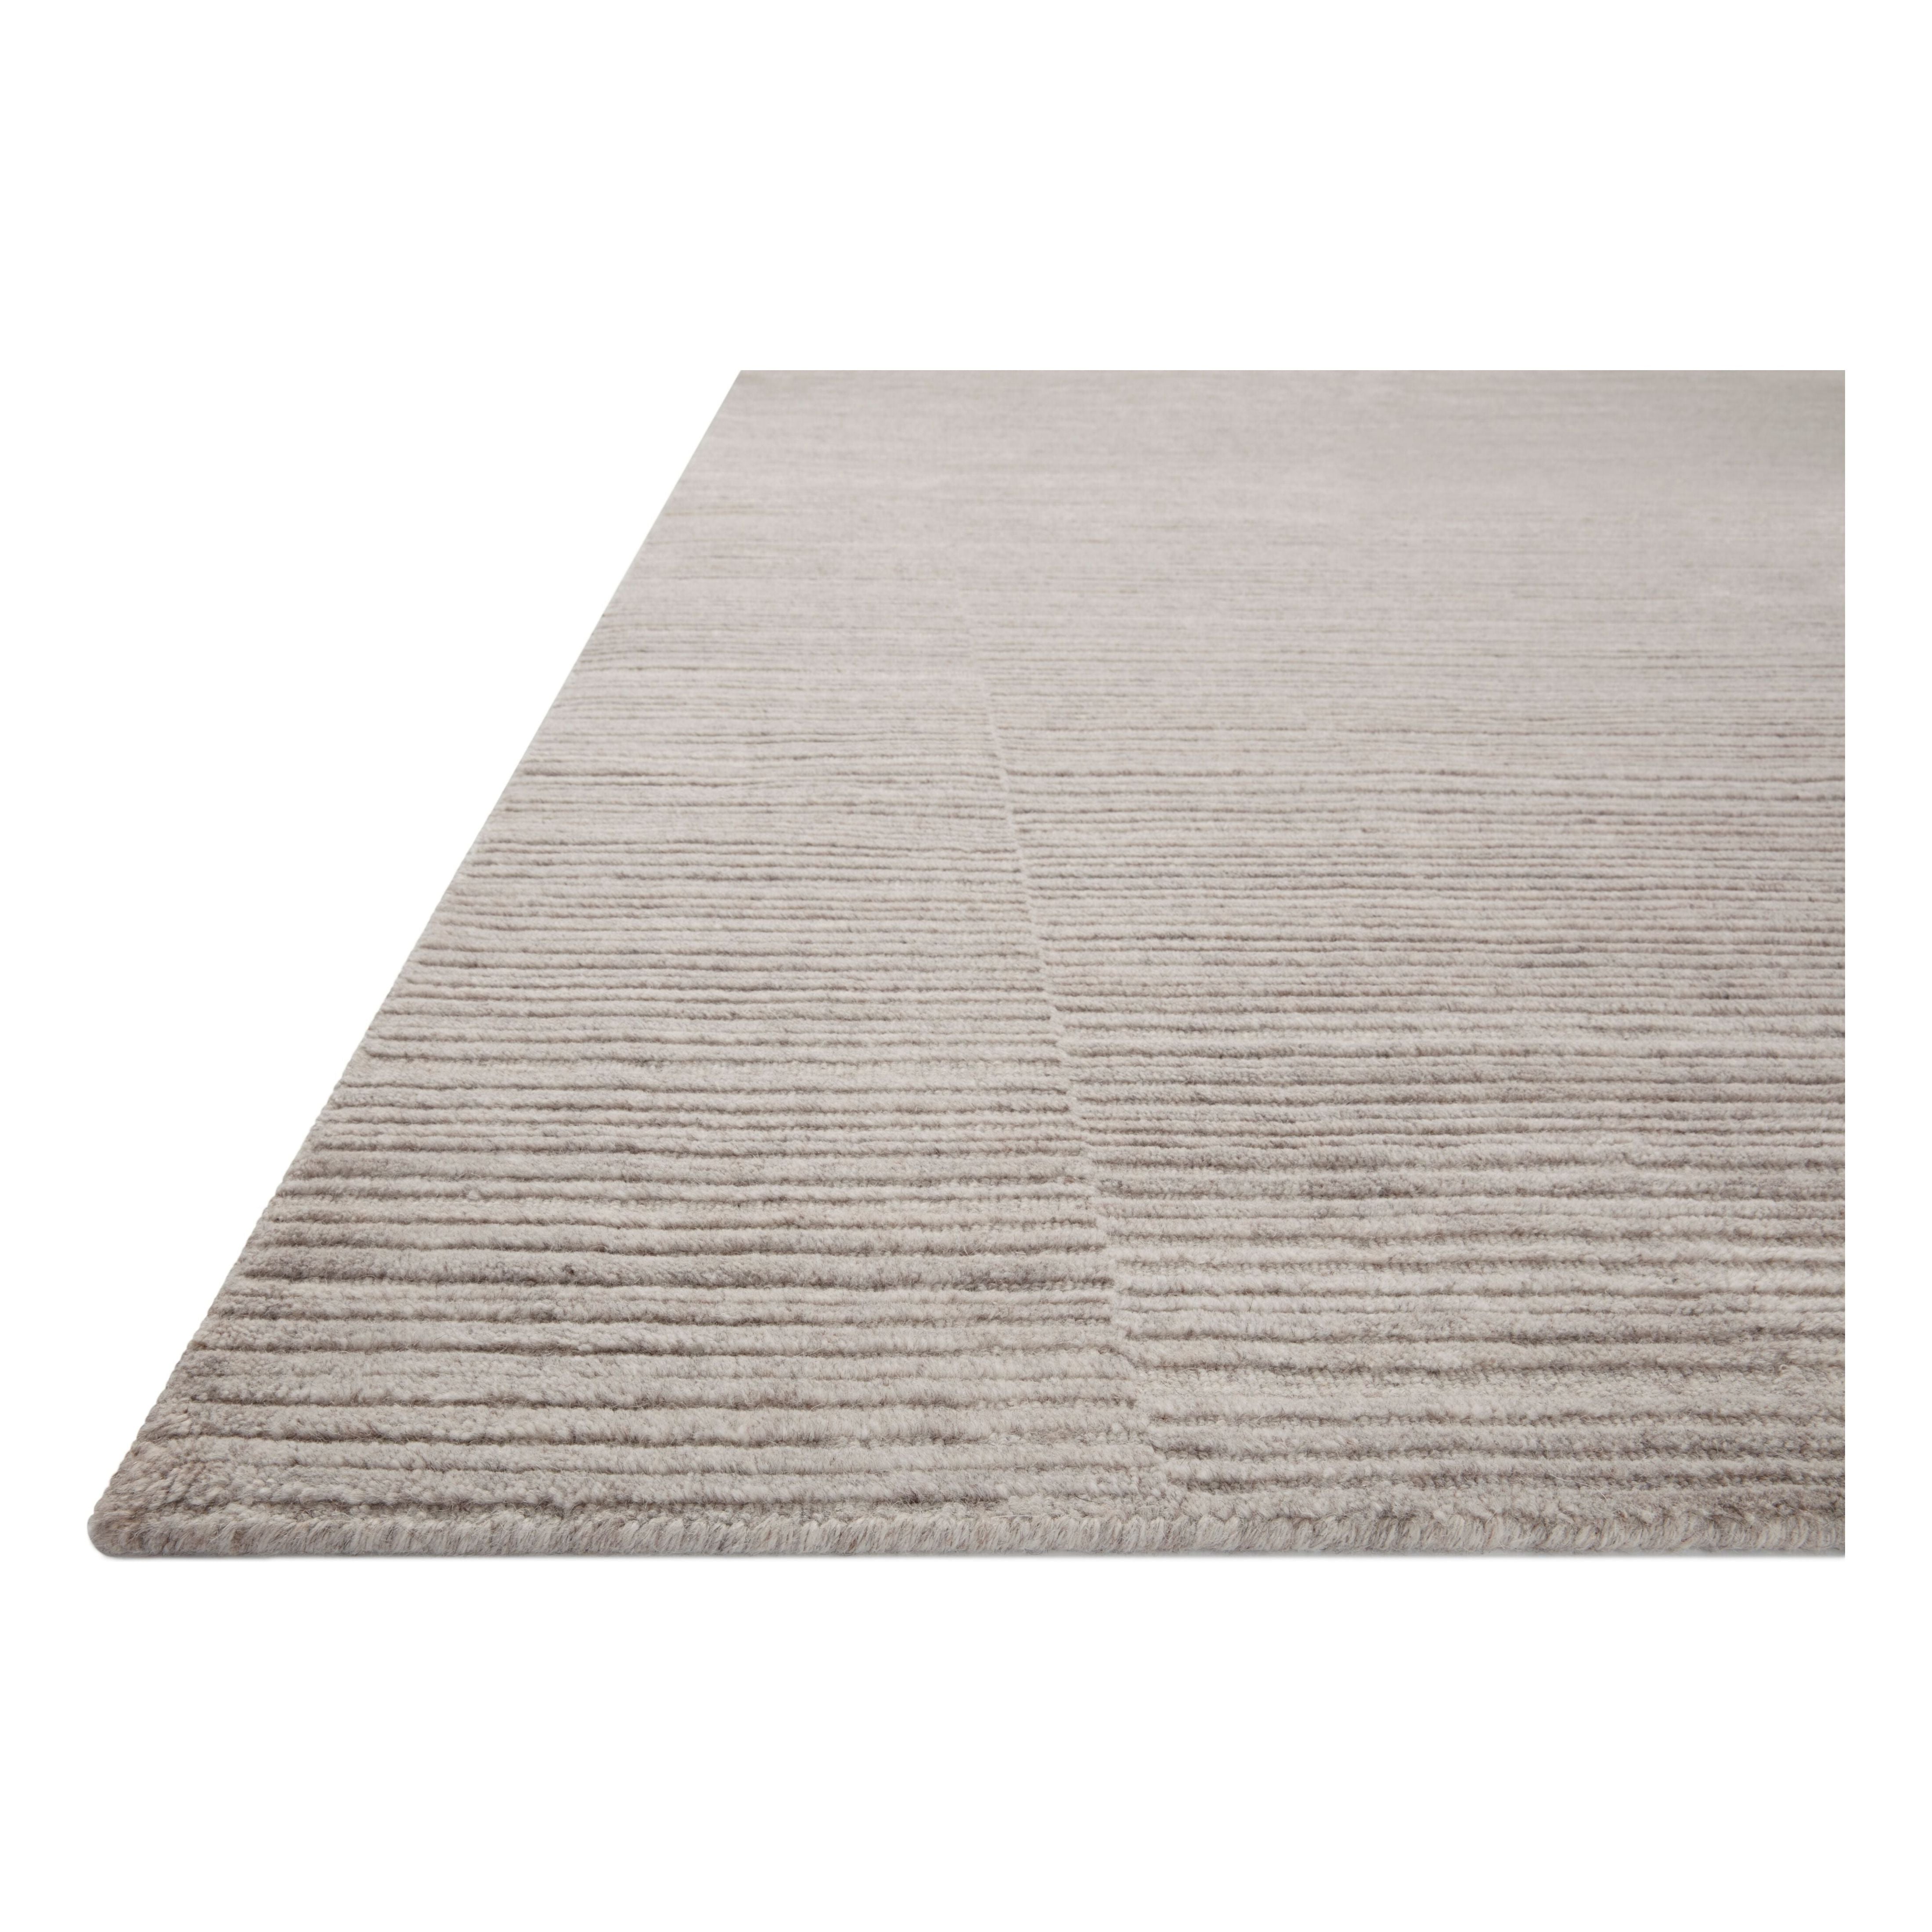 Sleek and modern, the Lou Collection is a luxurious hand-loomed area rug by Amber Lewis x Loloi. While the rug presents a minimal aesthetic, up close, it has a broken stripe pattern that creates a slightly ribbed effect. It’s made with a blend of wool and viscose that’s soft and durable, an elevated neutral for any room. Amethyst Home provides interior design, new home construction design consulting, vintage area rugs, and lighting in the San Diego metro area.